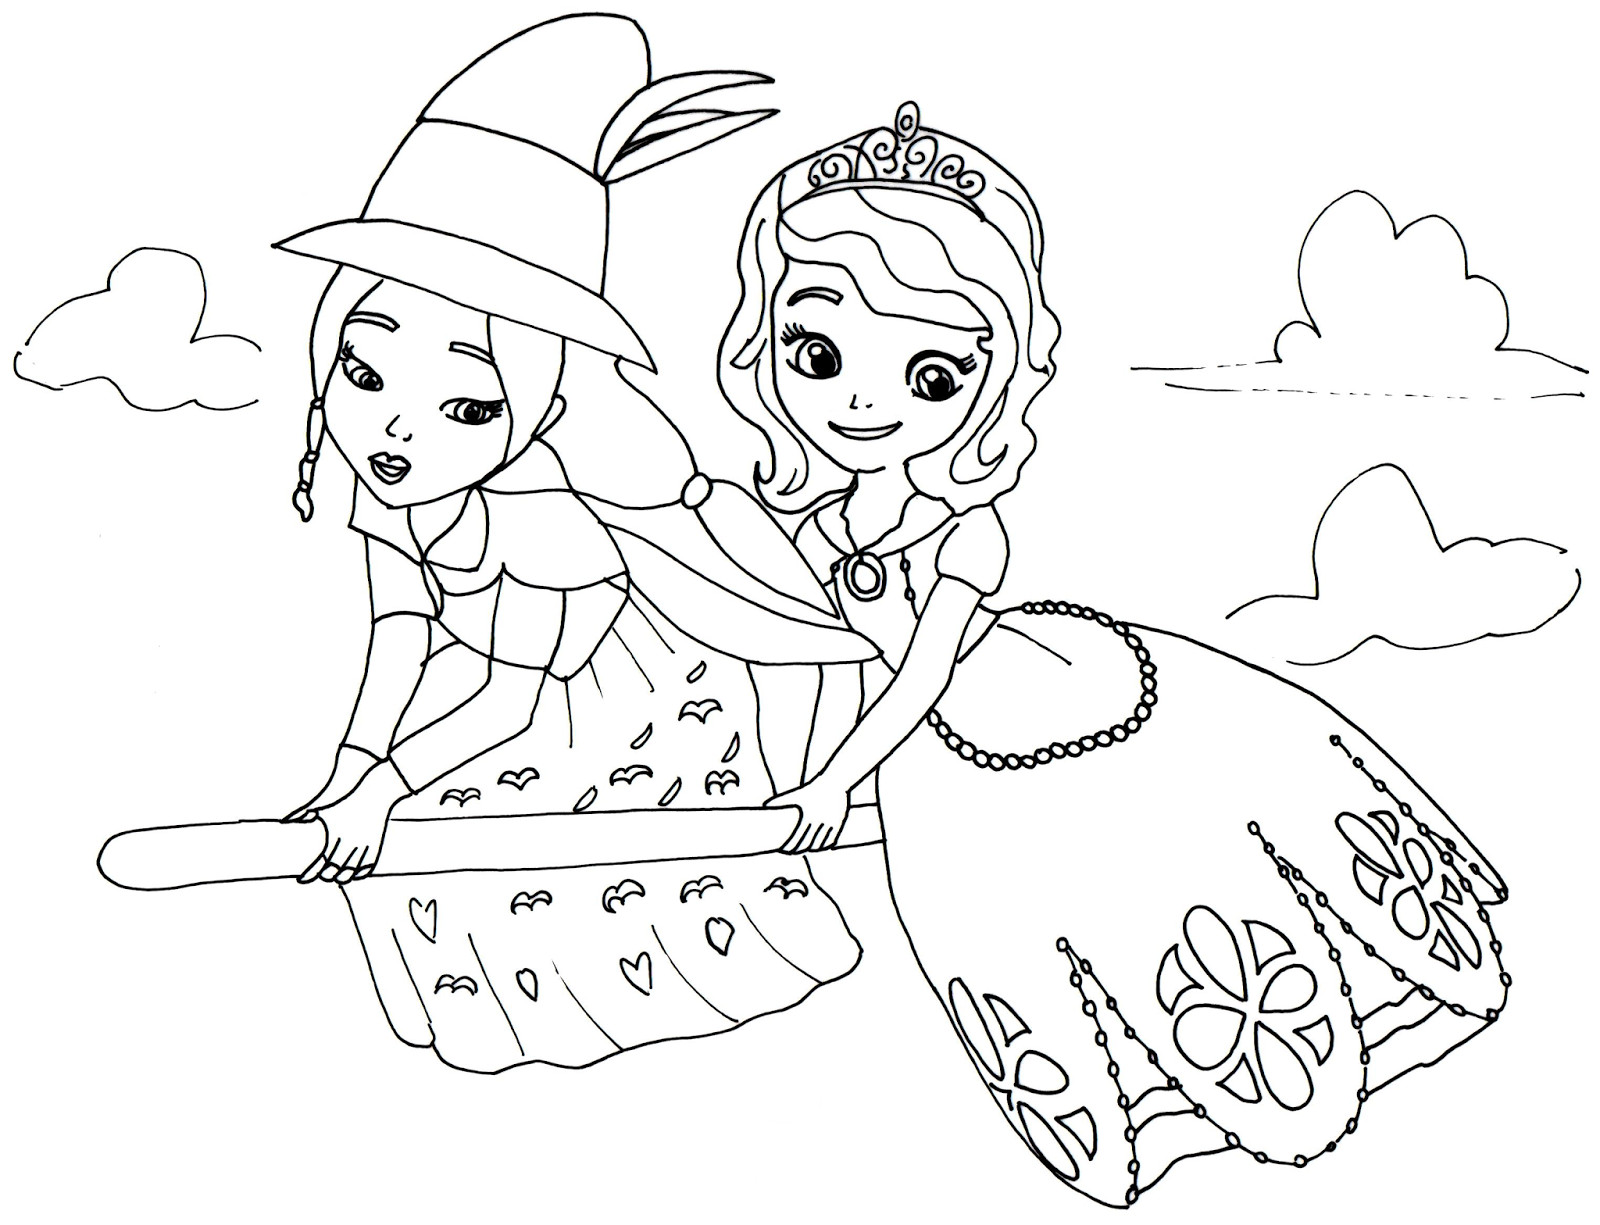 Sofia The First Printable Coloring Pages
 Sofia The First Coloring Pages March 2014